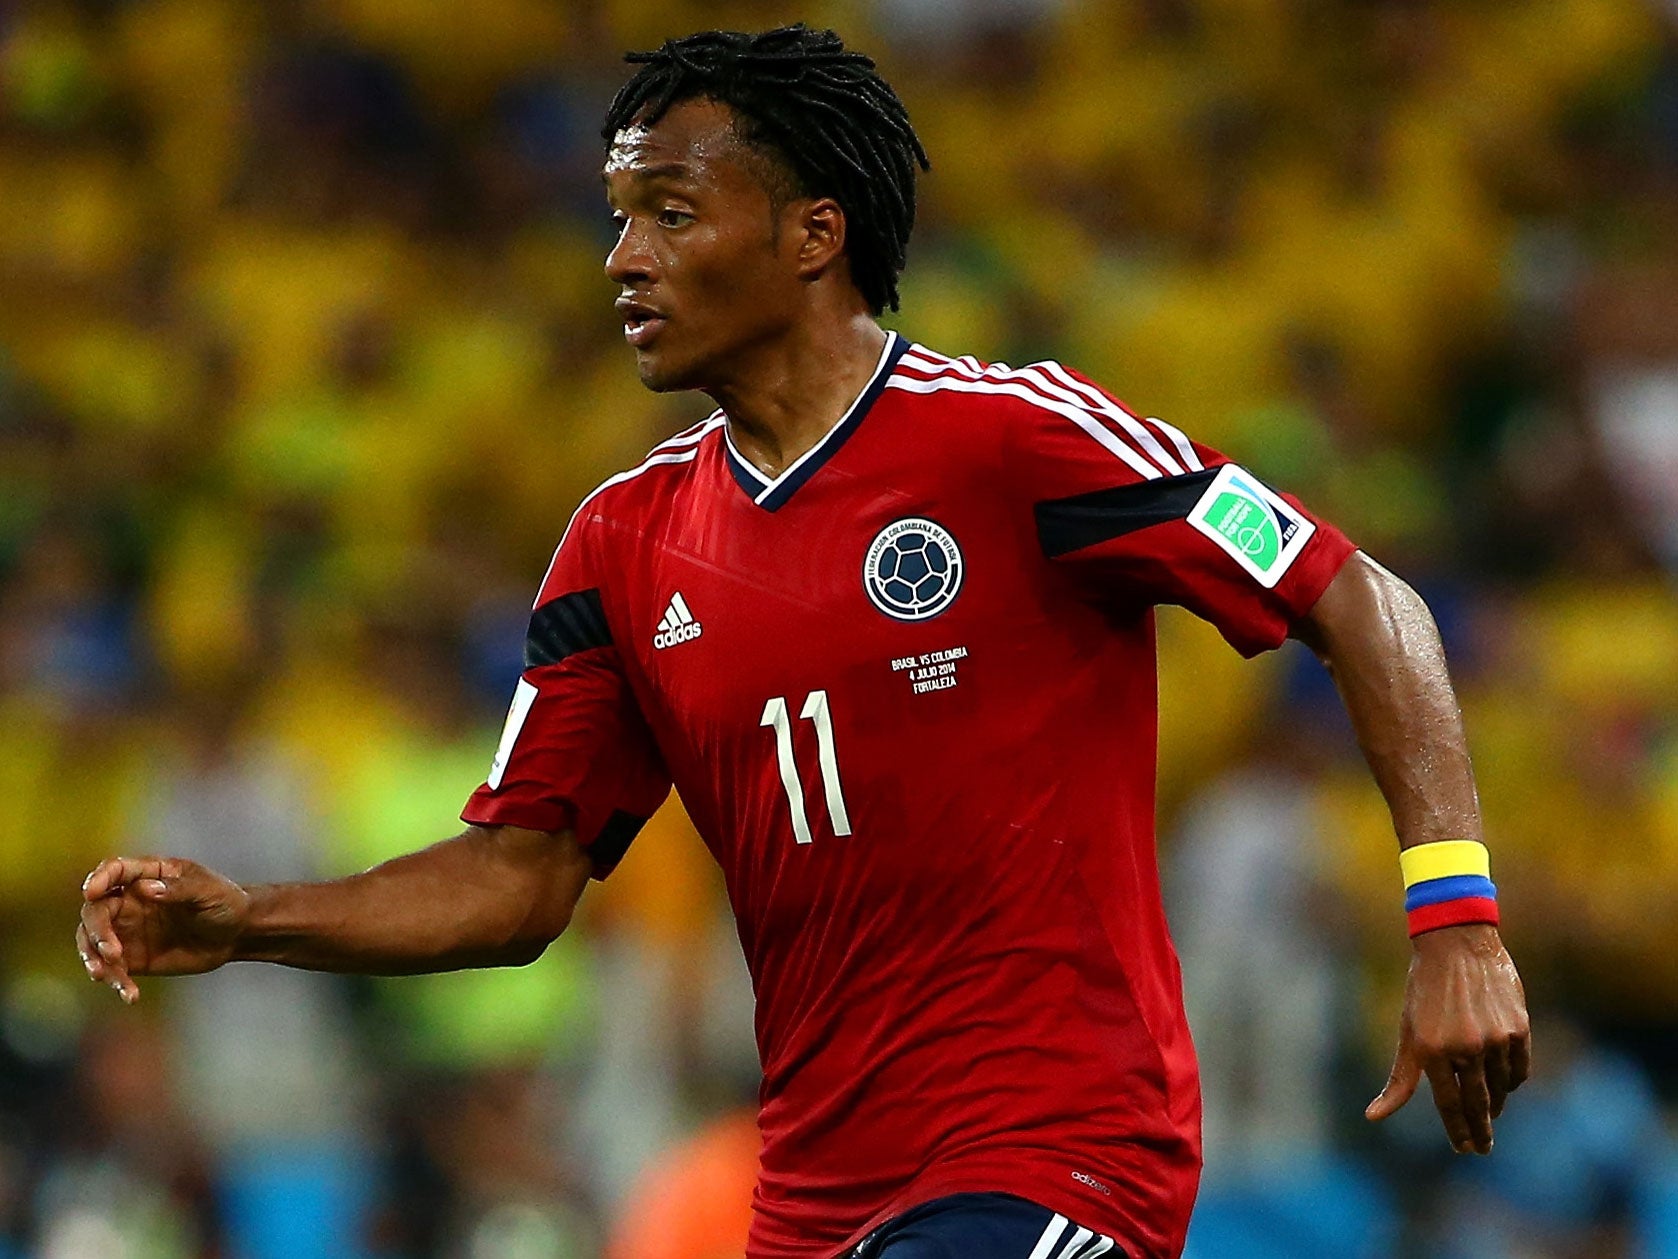 Juan Cuadrado is the subject of interest from some of Europe's biggest clubs